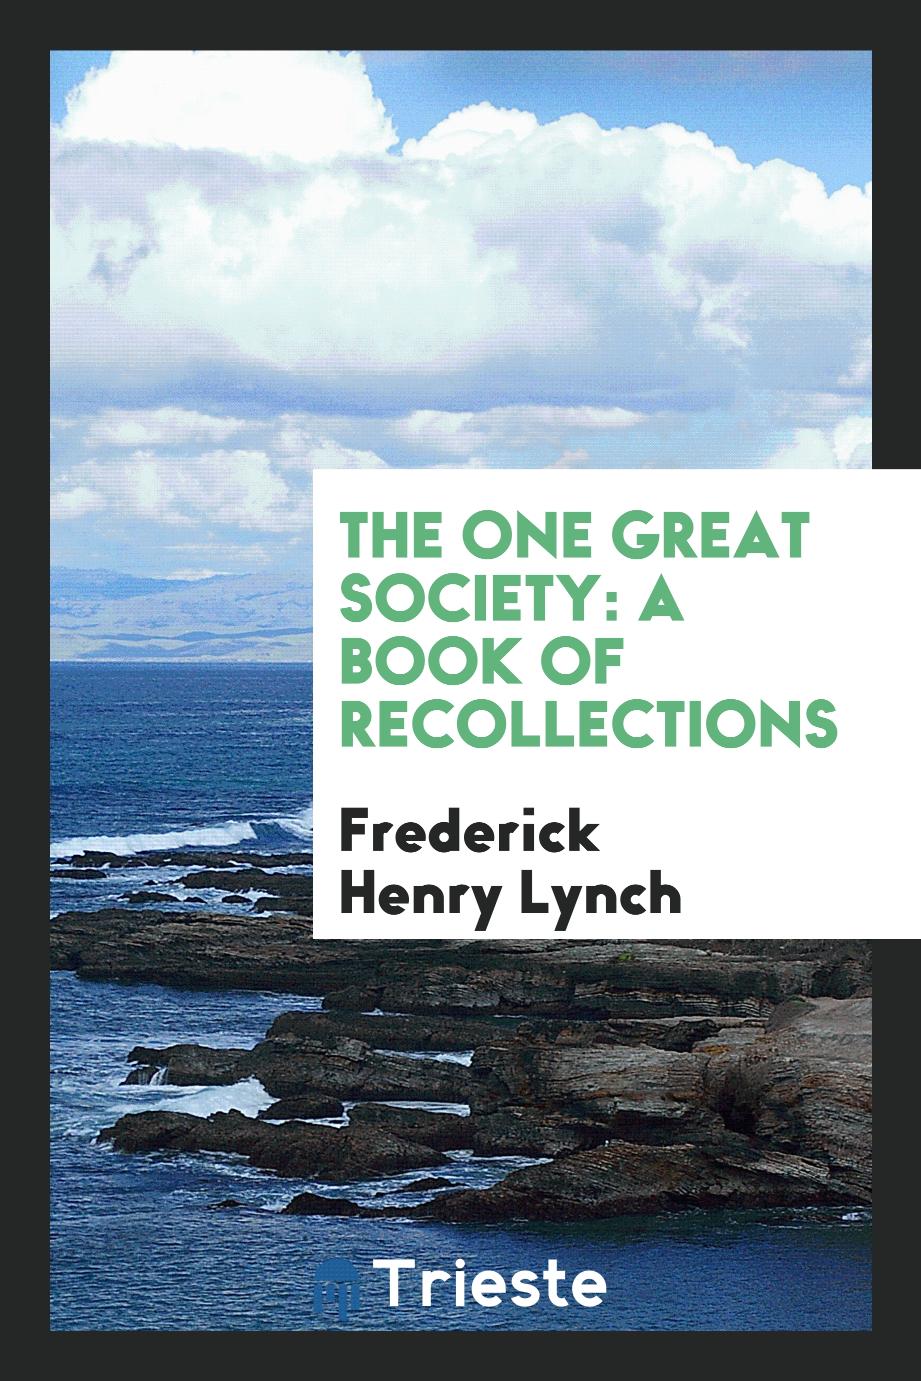 The one great society: a book of recollections